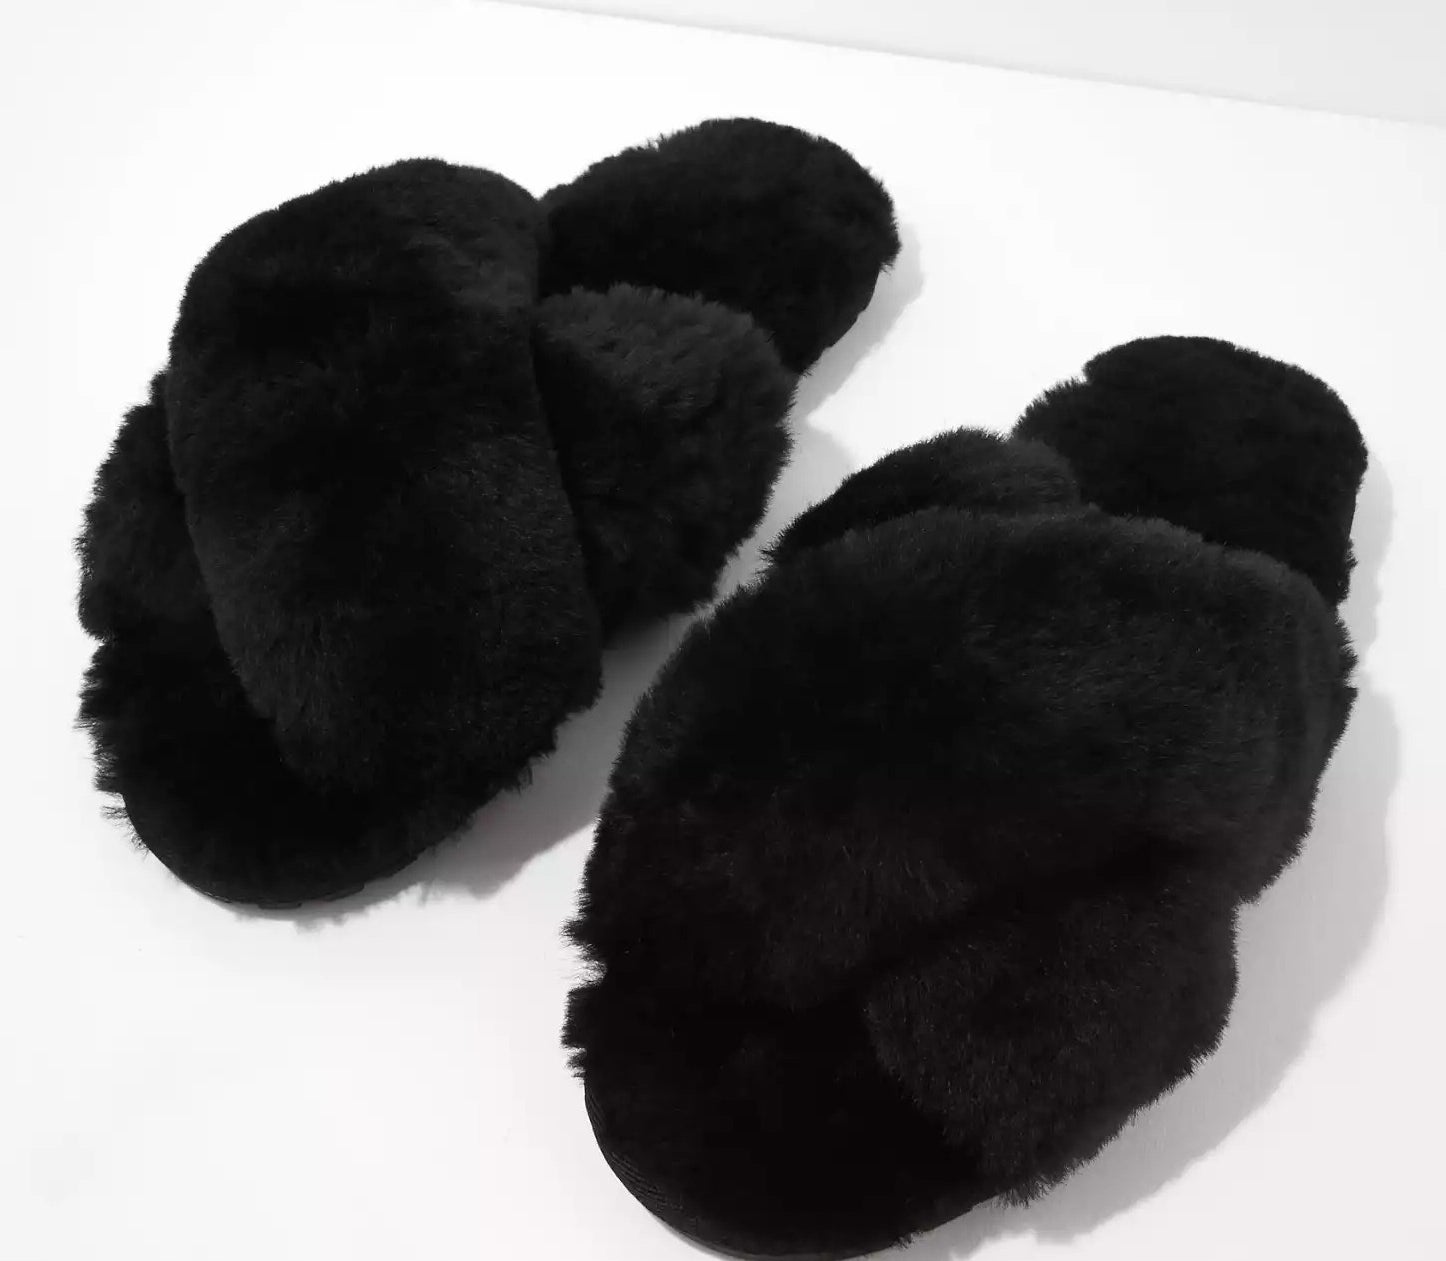 the pair of fuzzy black slippers